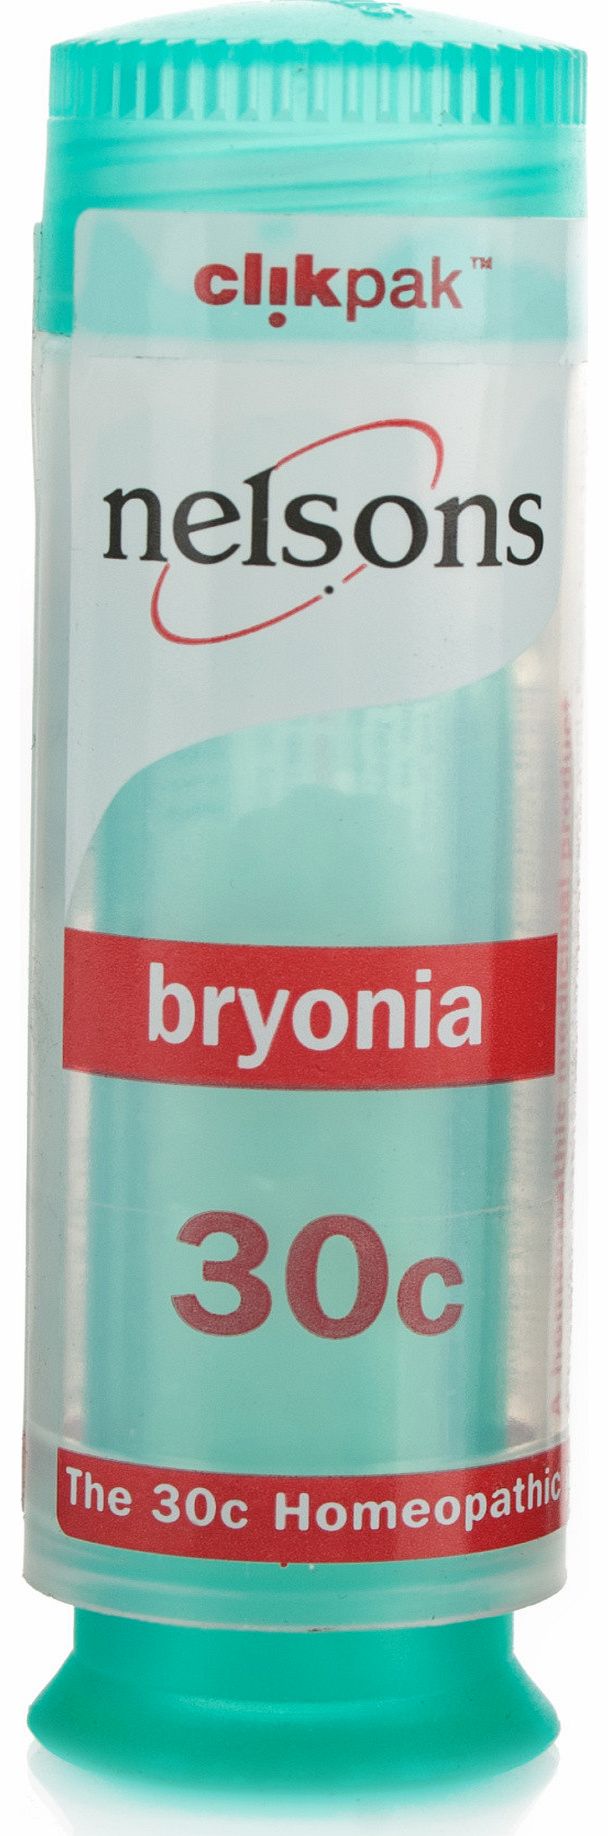 Nelsons Bryonia 30c